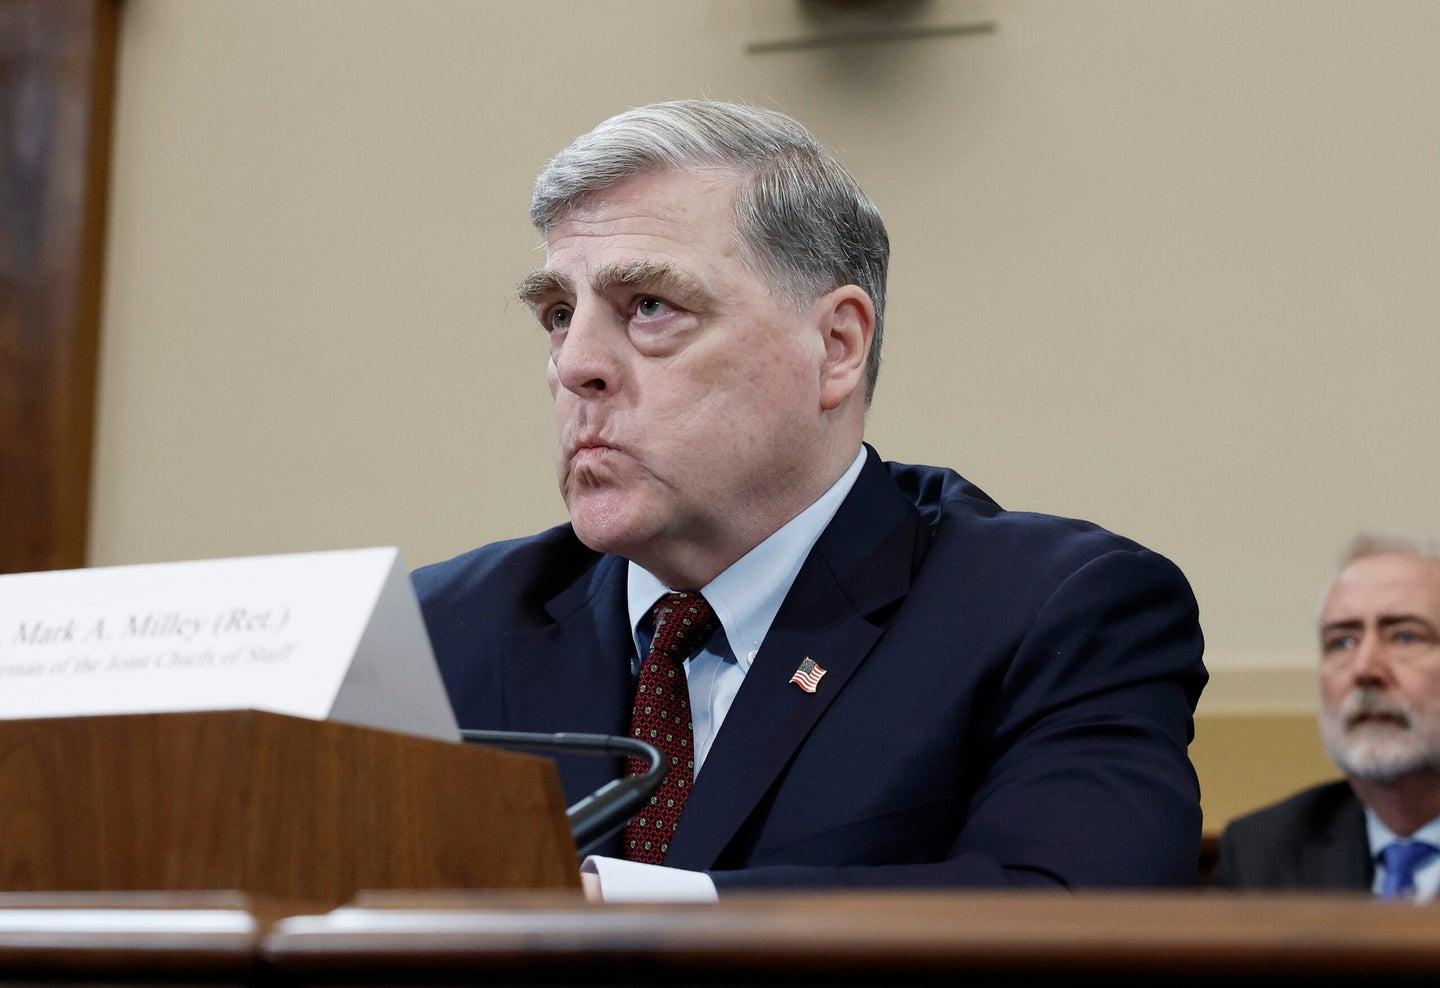 Retired General Mark Milley faced a barrage of questions from Republicans over the Biden administration's handling of the Afghan withdrawal. Photo by Anna Moneymaker/Getty Images